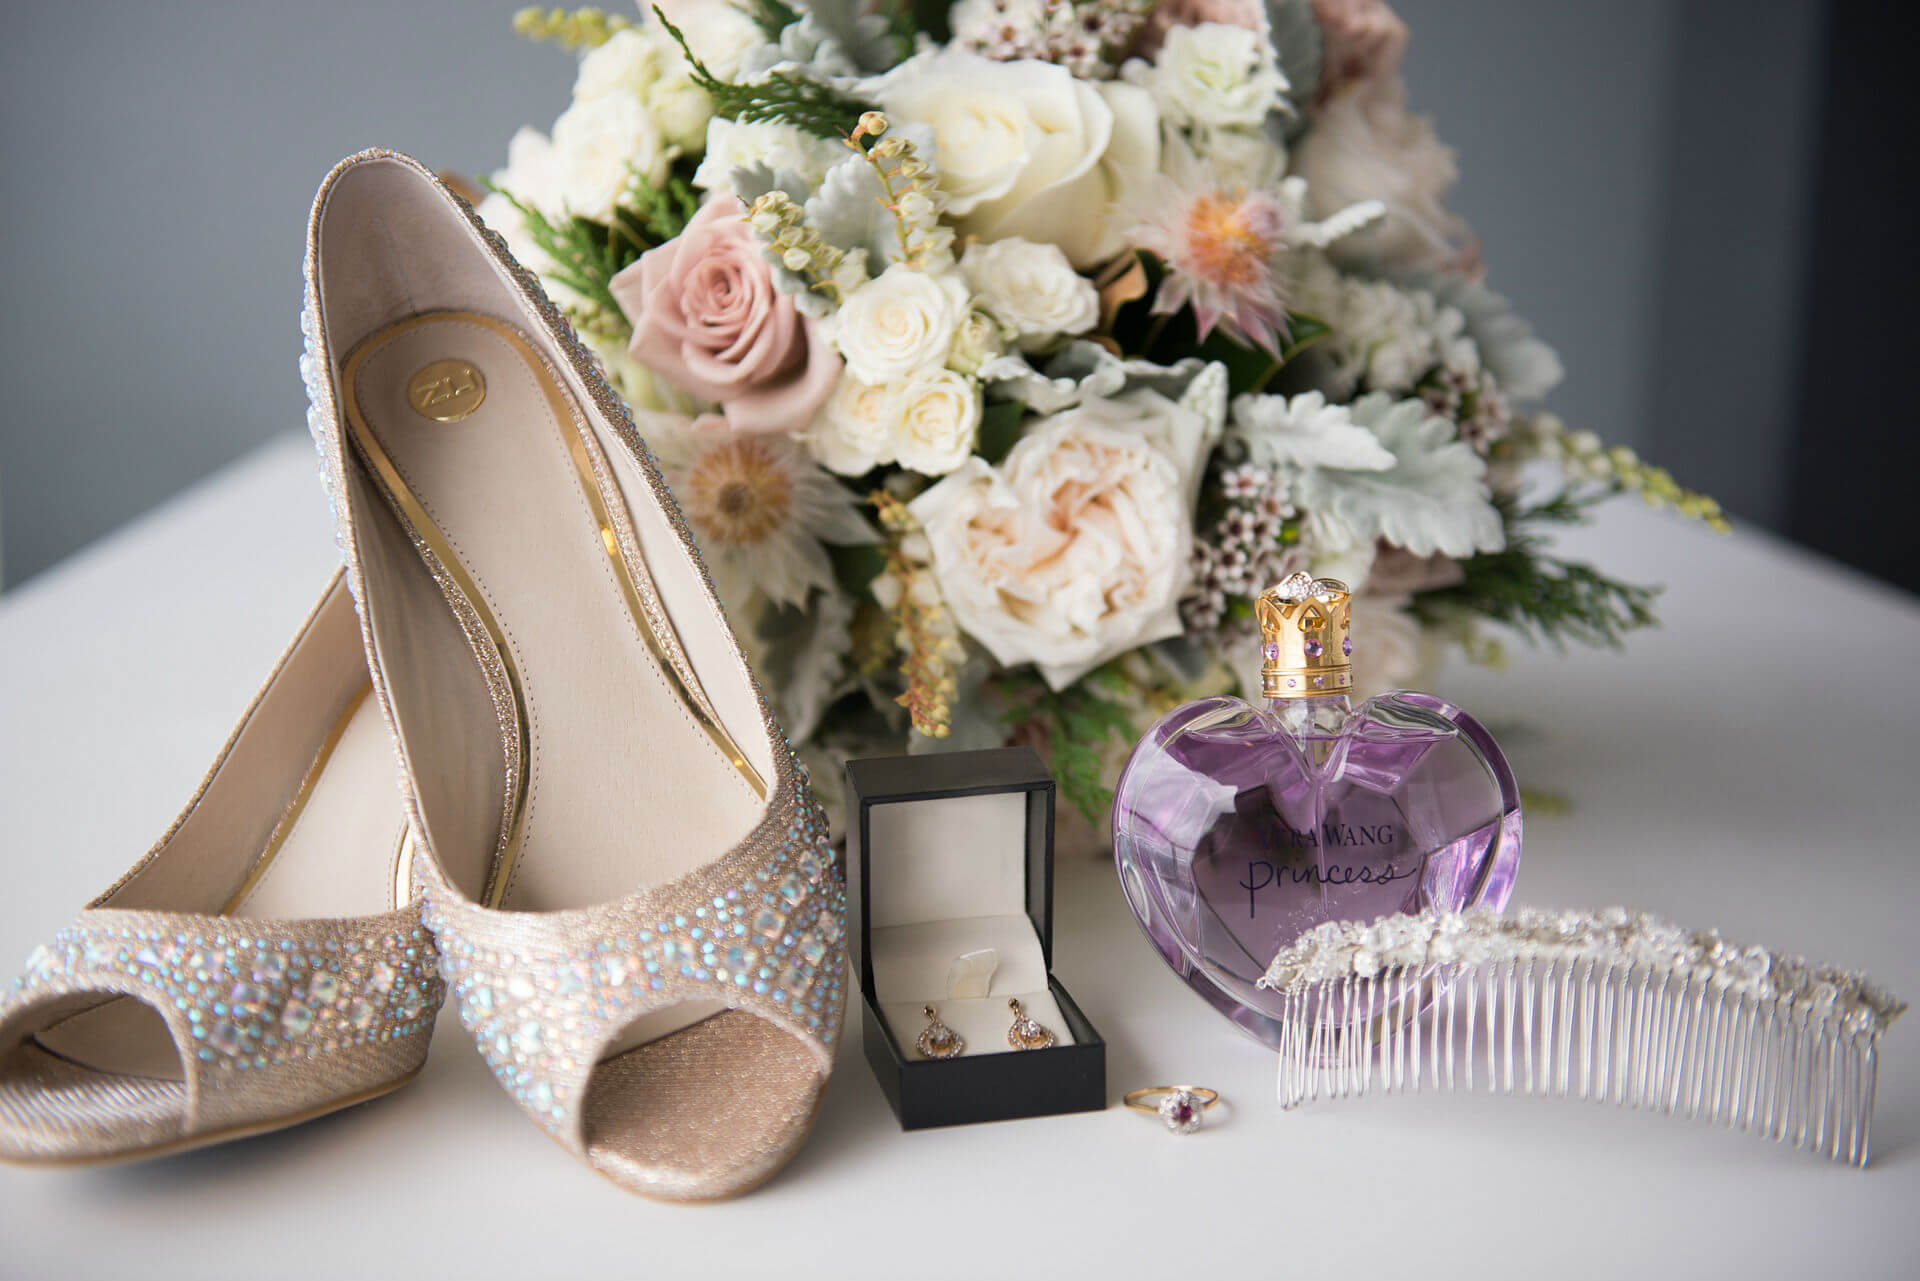 wedding ring, shoes, bouquet, photograph